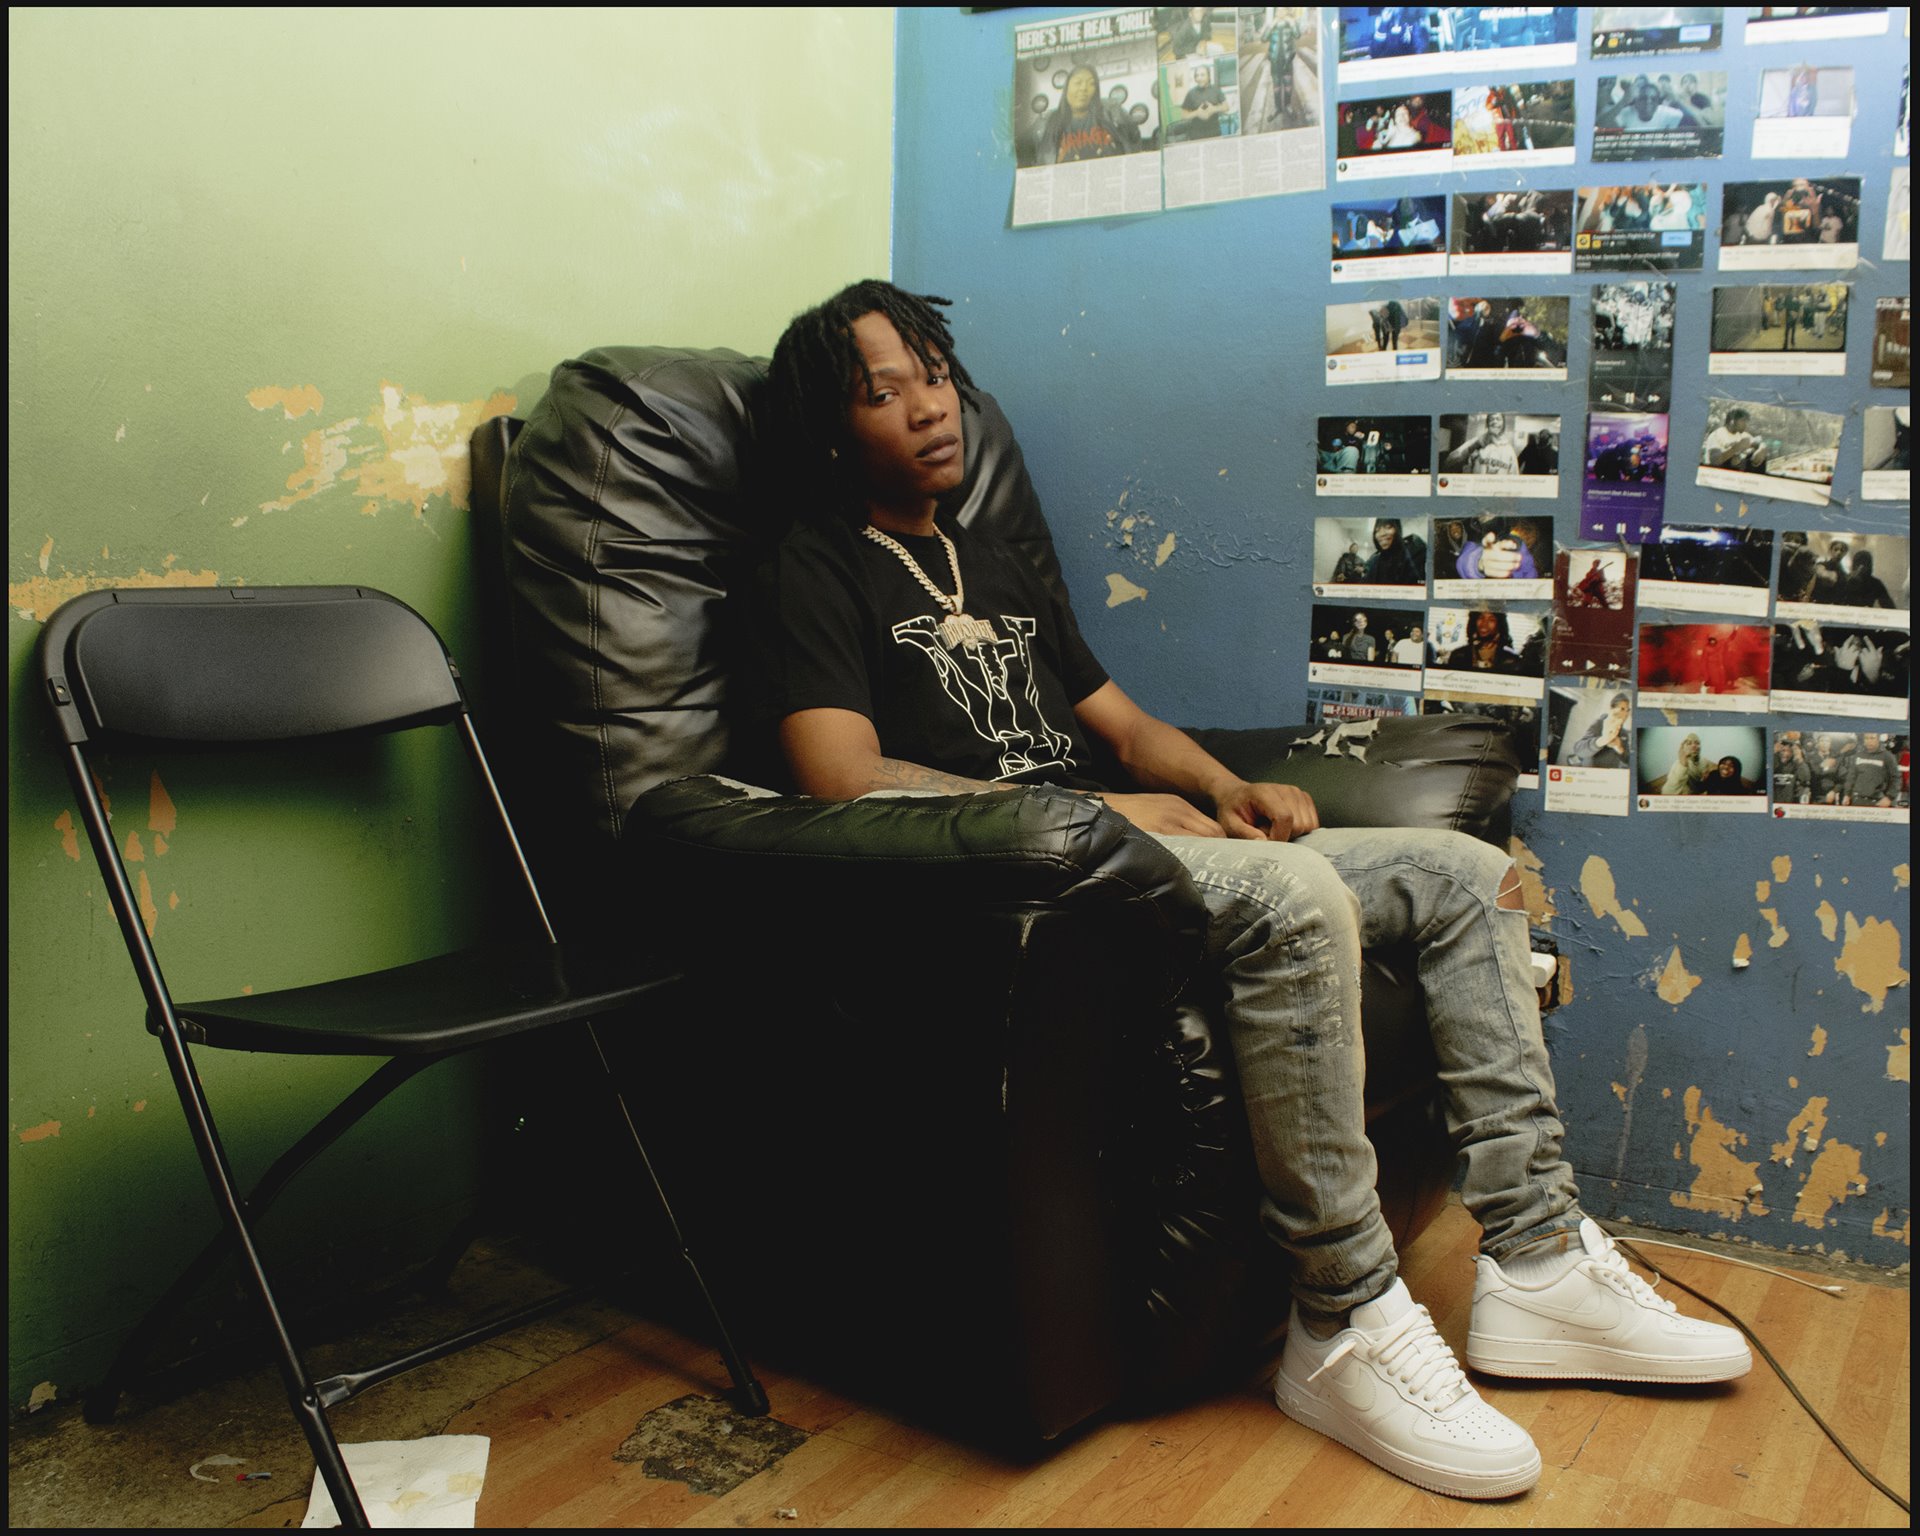 <p>B-Lovee (21) is a South Bronx native who has turned local renown into global success by going viral on video sharing platforms like TikTok. South Bronx, New York, United States.</p>
